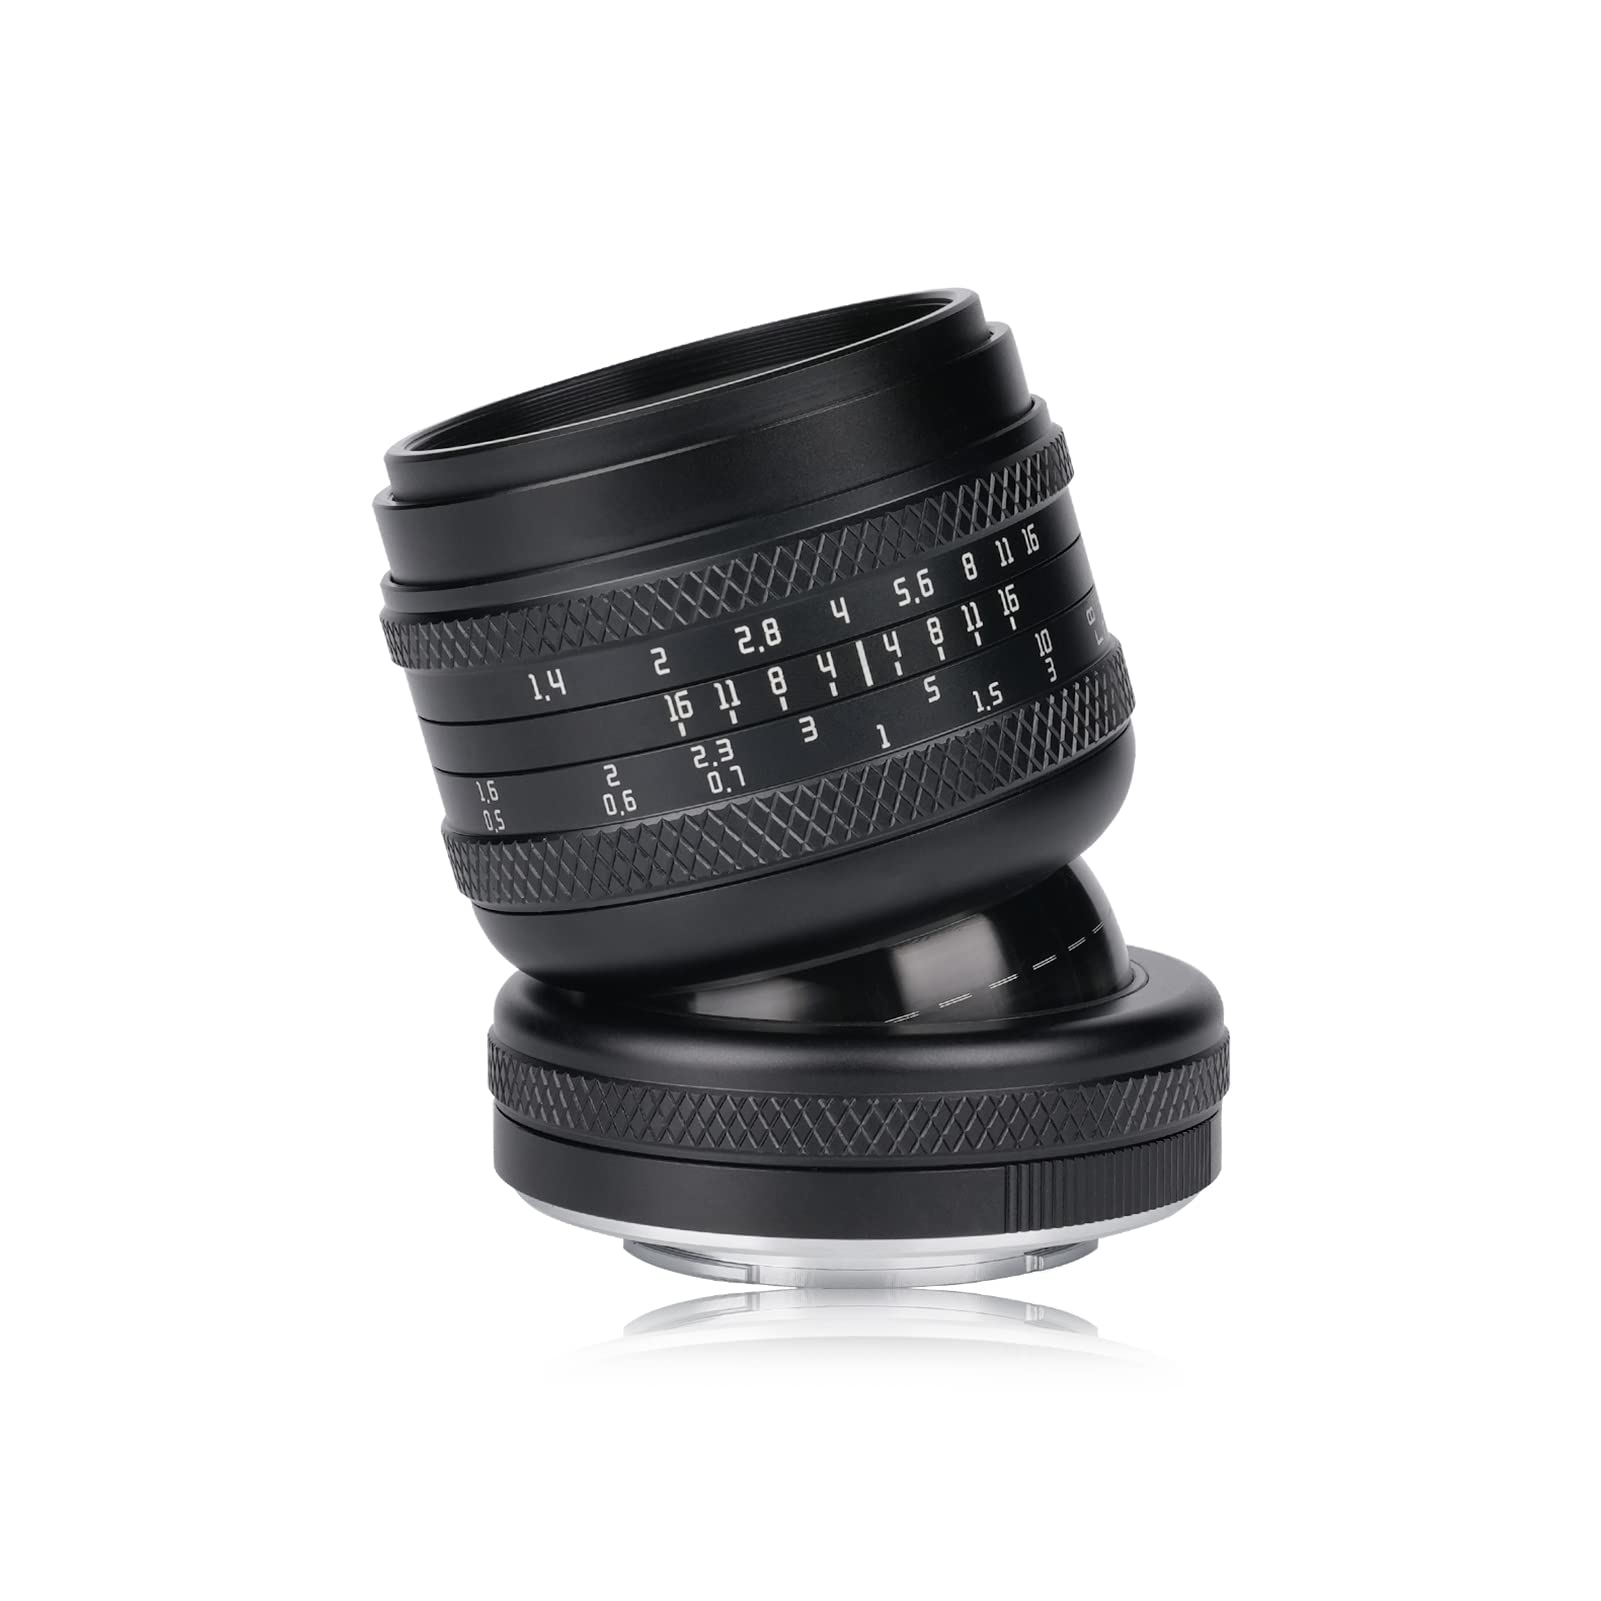 AstrHori 50mm F1.4 Large Aperture Lens Full Frame Manual 2-in-1 Tilt Lens Miniature Model Effect Compatible with Sony E-Mount Mirrorless Camera A7,A7R,A7S,A9,A6000,A6300,A6500,A6600.etc(Black)